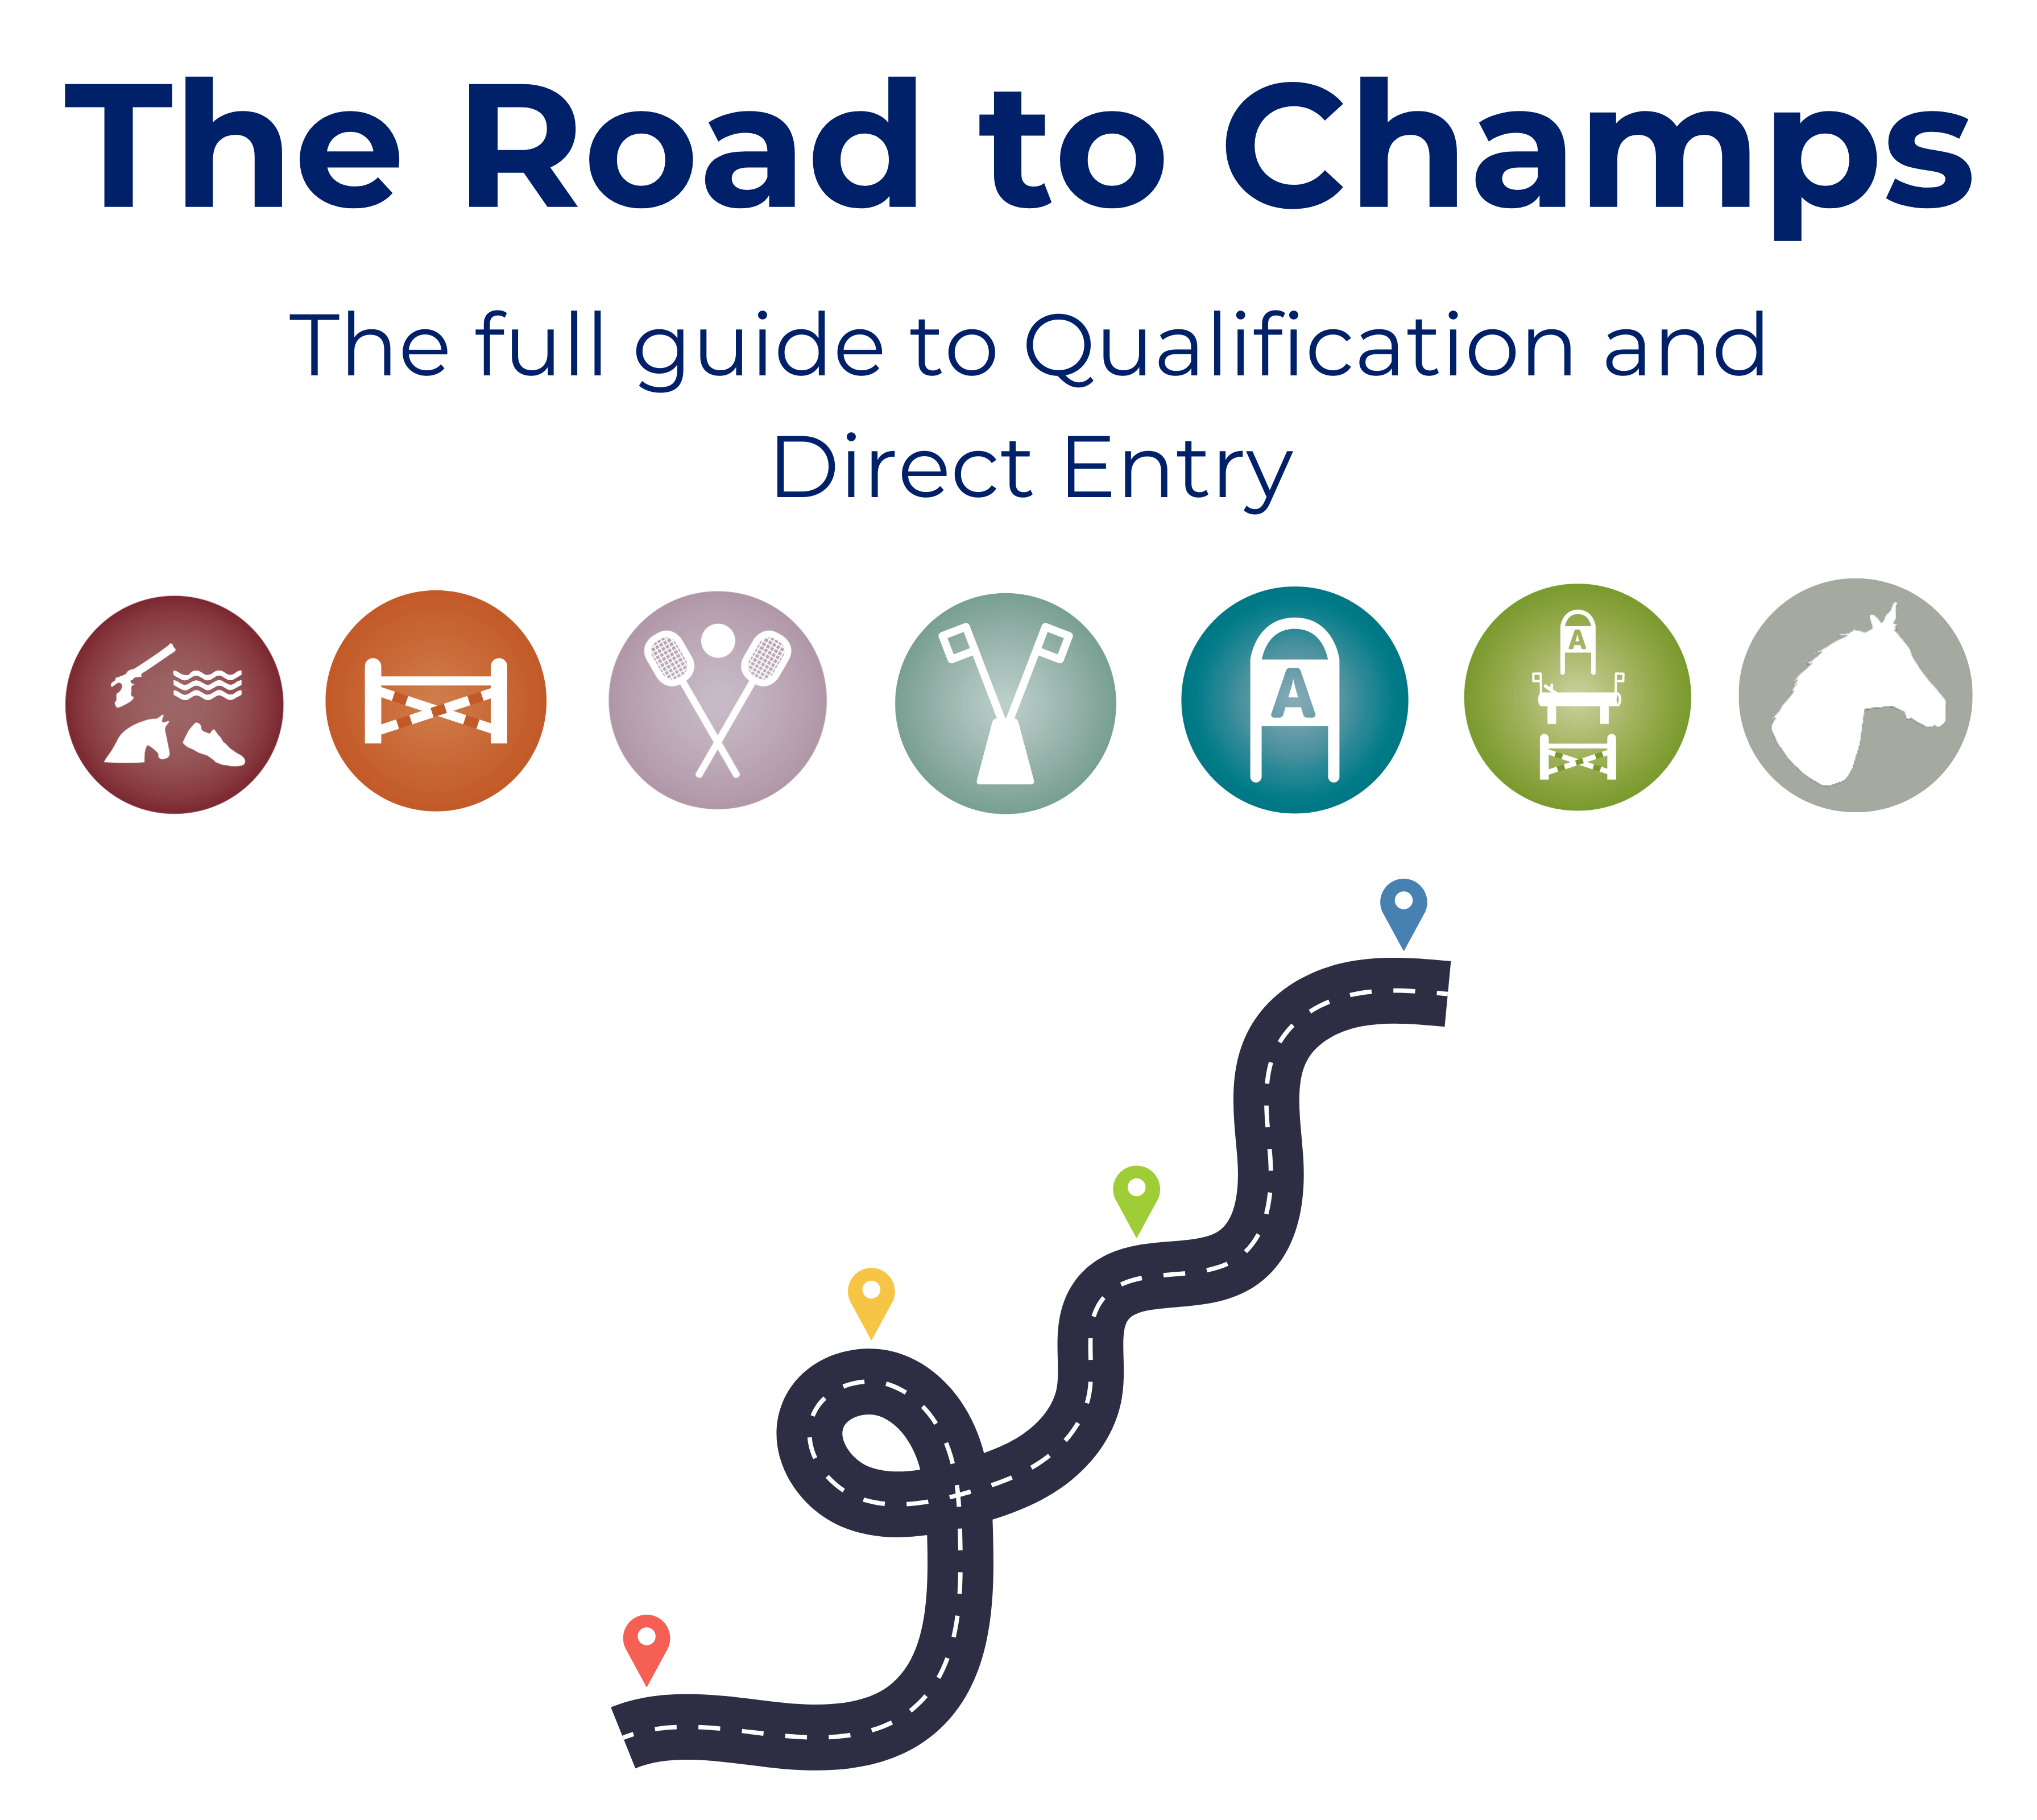 The Road to Champs